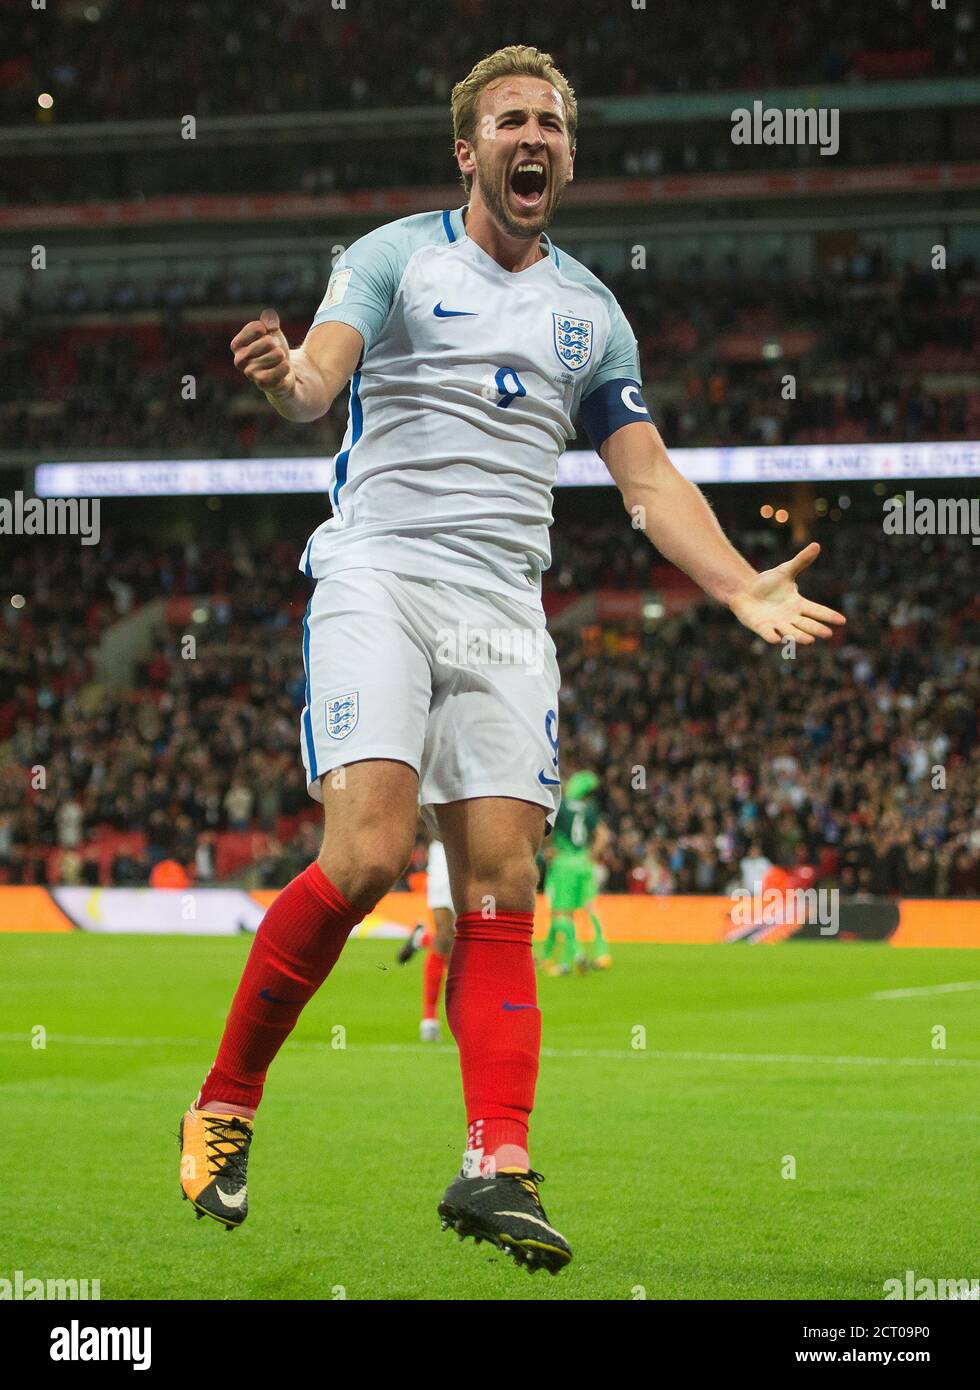 HARRY KANE CELEBRATES SCORING ENGLAND'S WINNING GOAL THAT SEES THEM QUALIFY FOR THE 2018 WORLD CUP. ENGLAND v SLOVENIA. PICTURE : © MARK PAIN / ALAMY Stock Photo